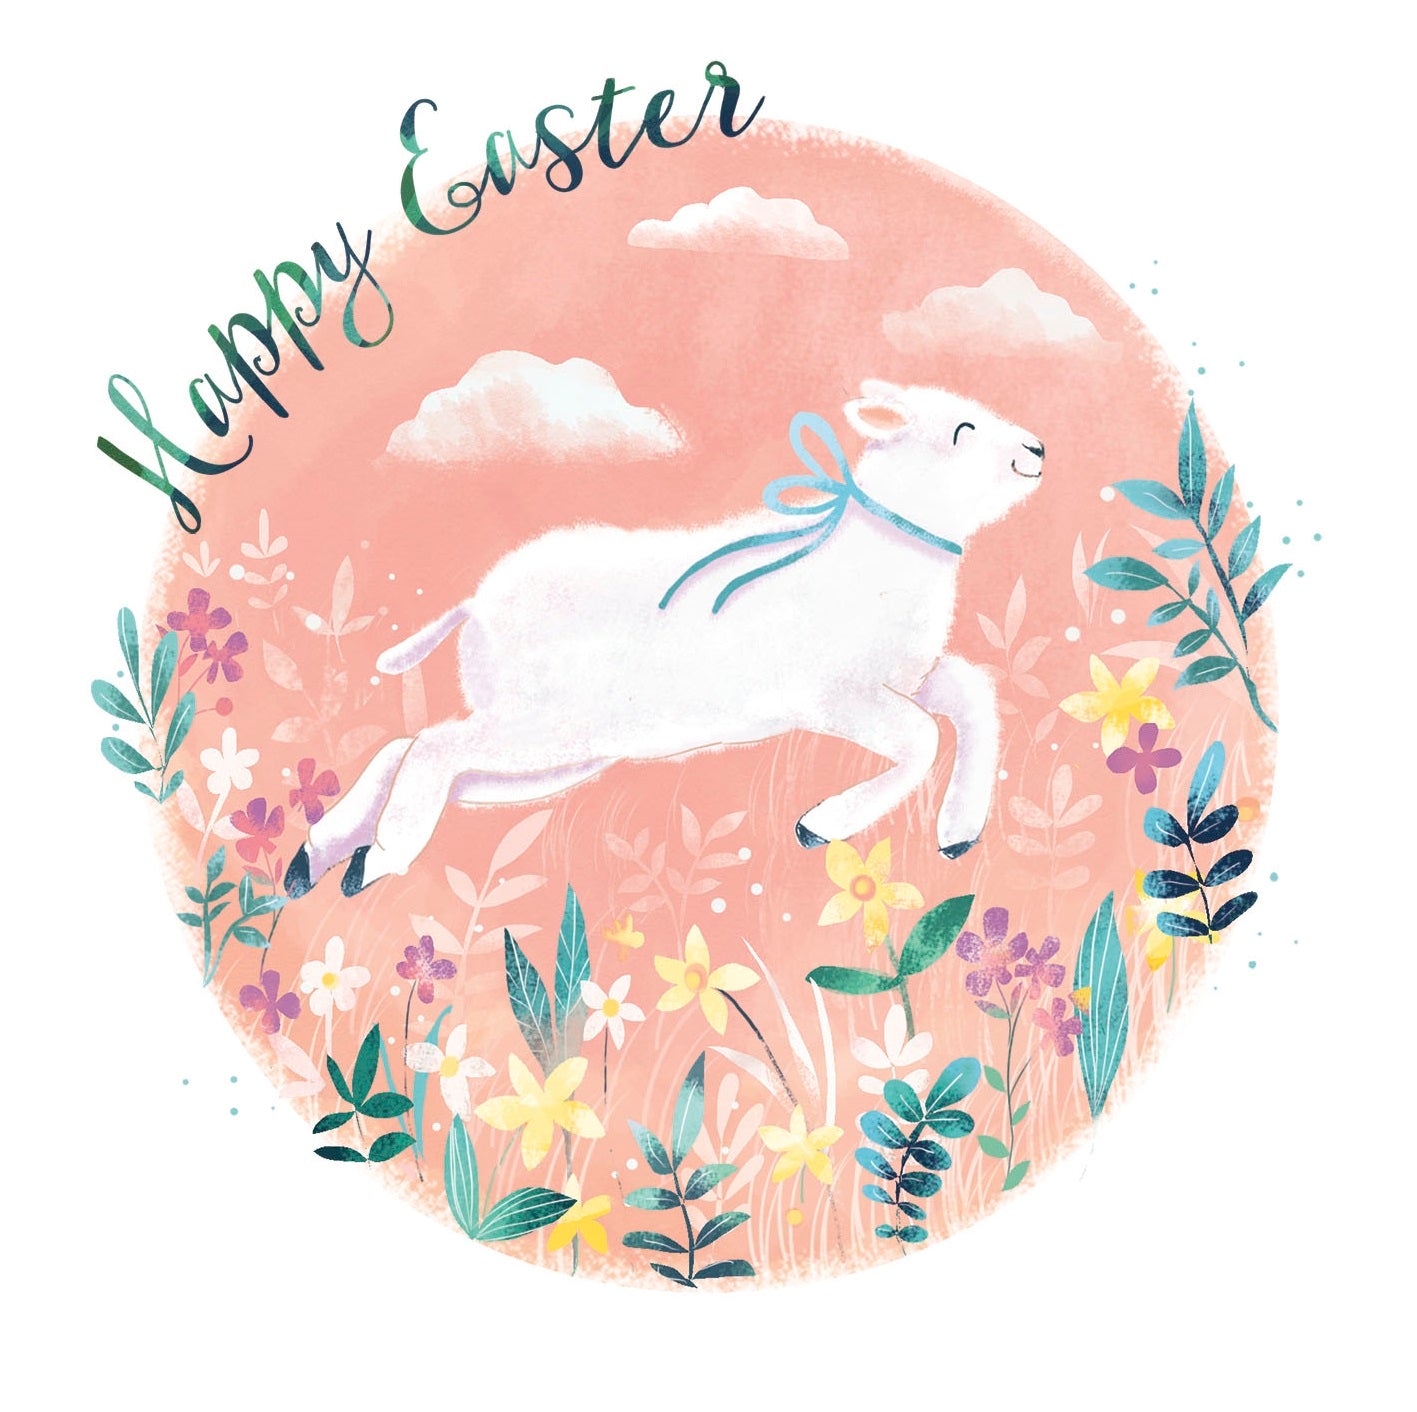 Pack of 6 RSPCA Charity Easter Greeting Cards